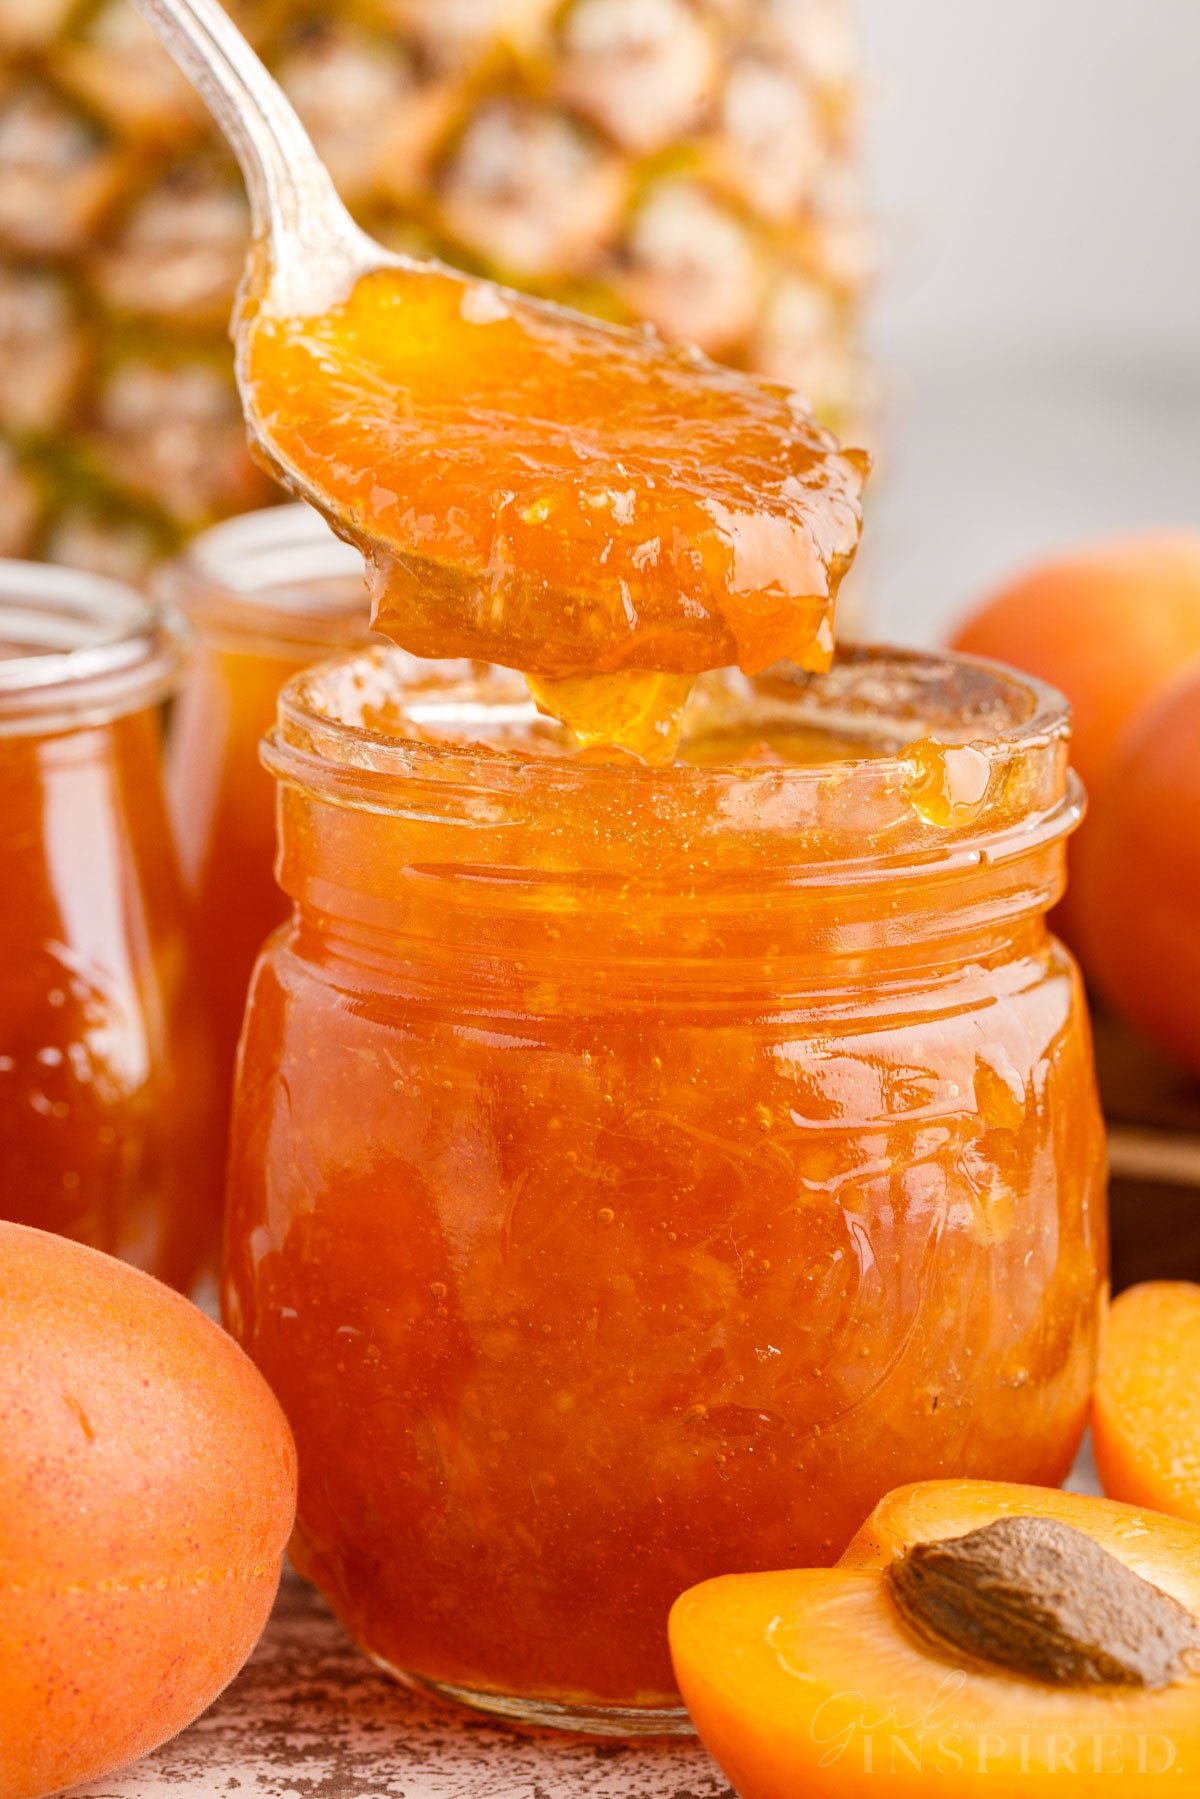 Apricot Pineapple Jam in a glass jar with a spoonful of jam, fresh apricots and pineapple in the background.